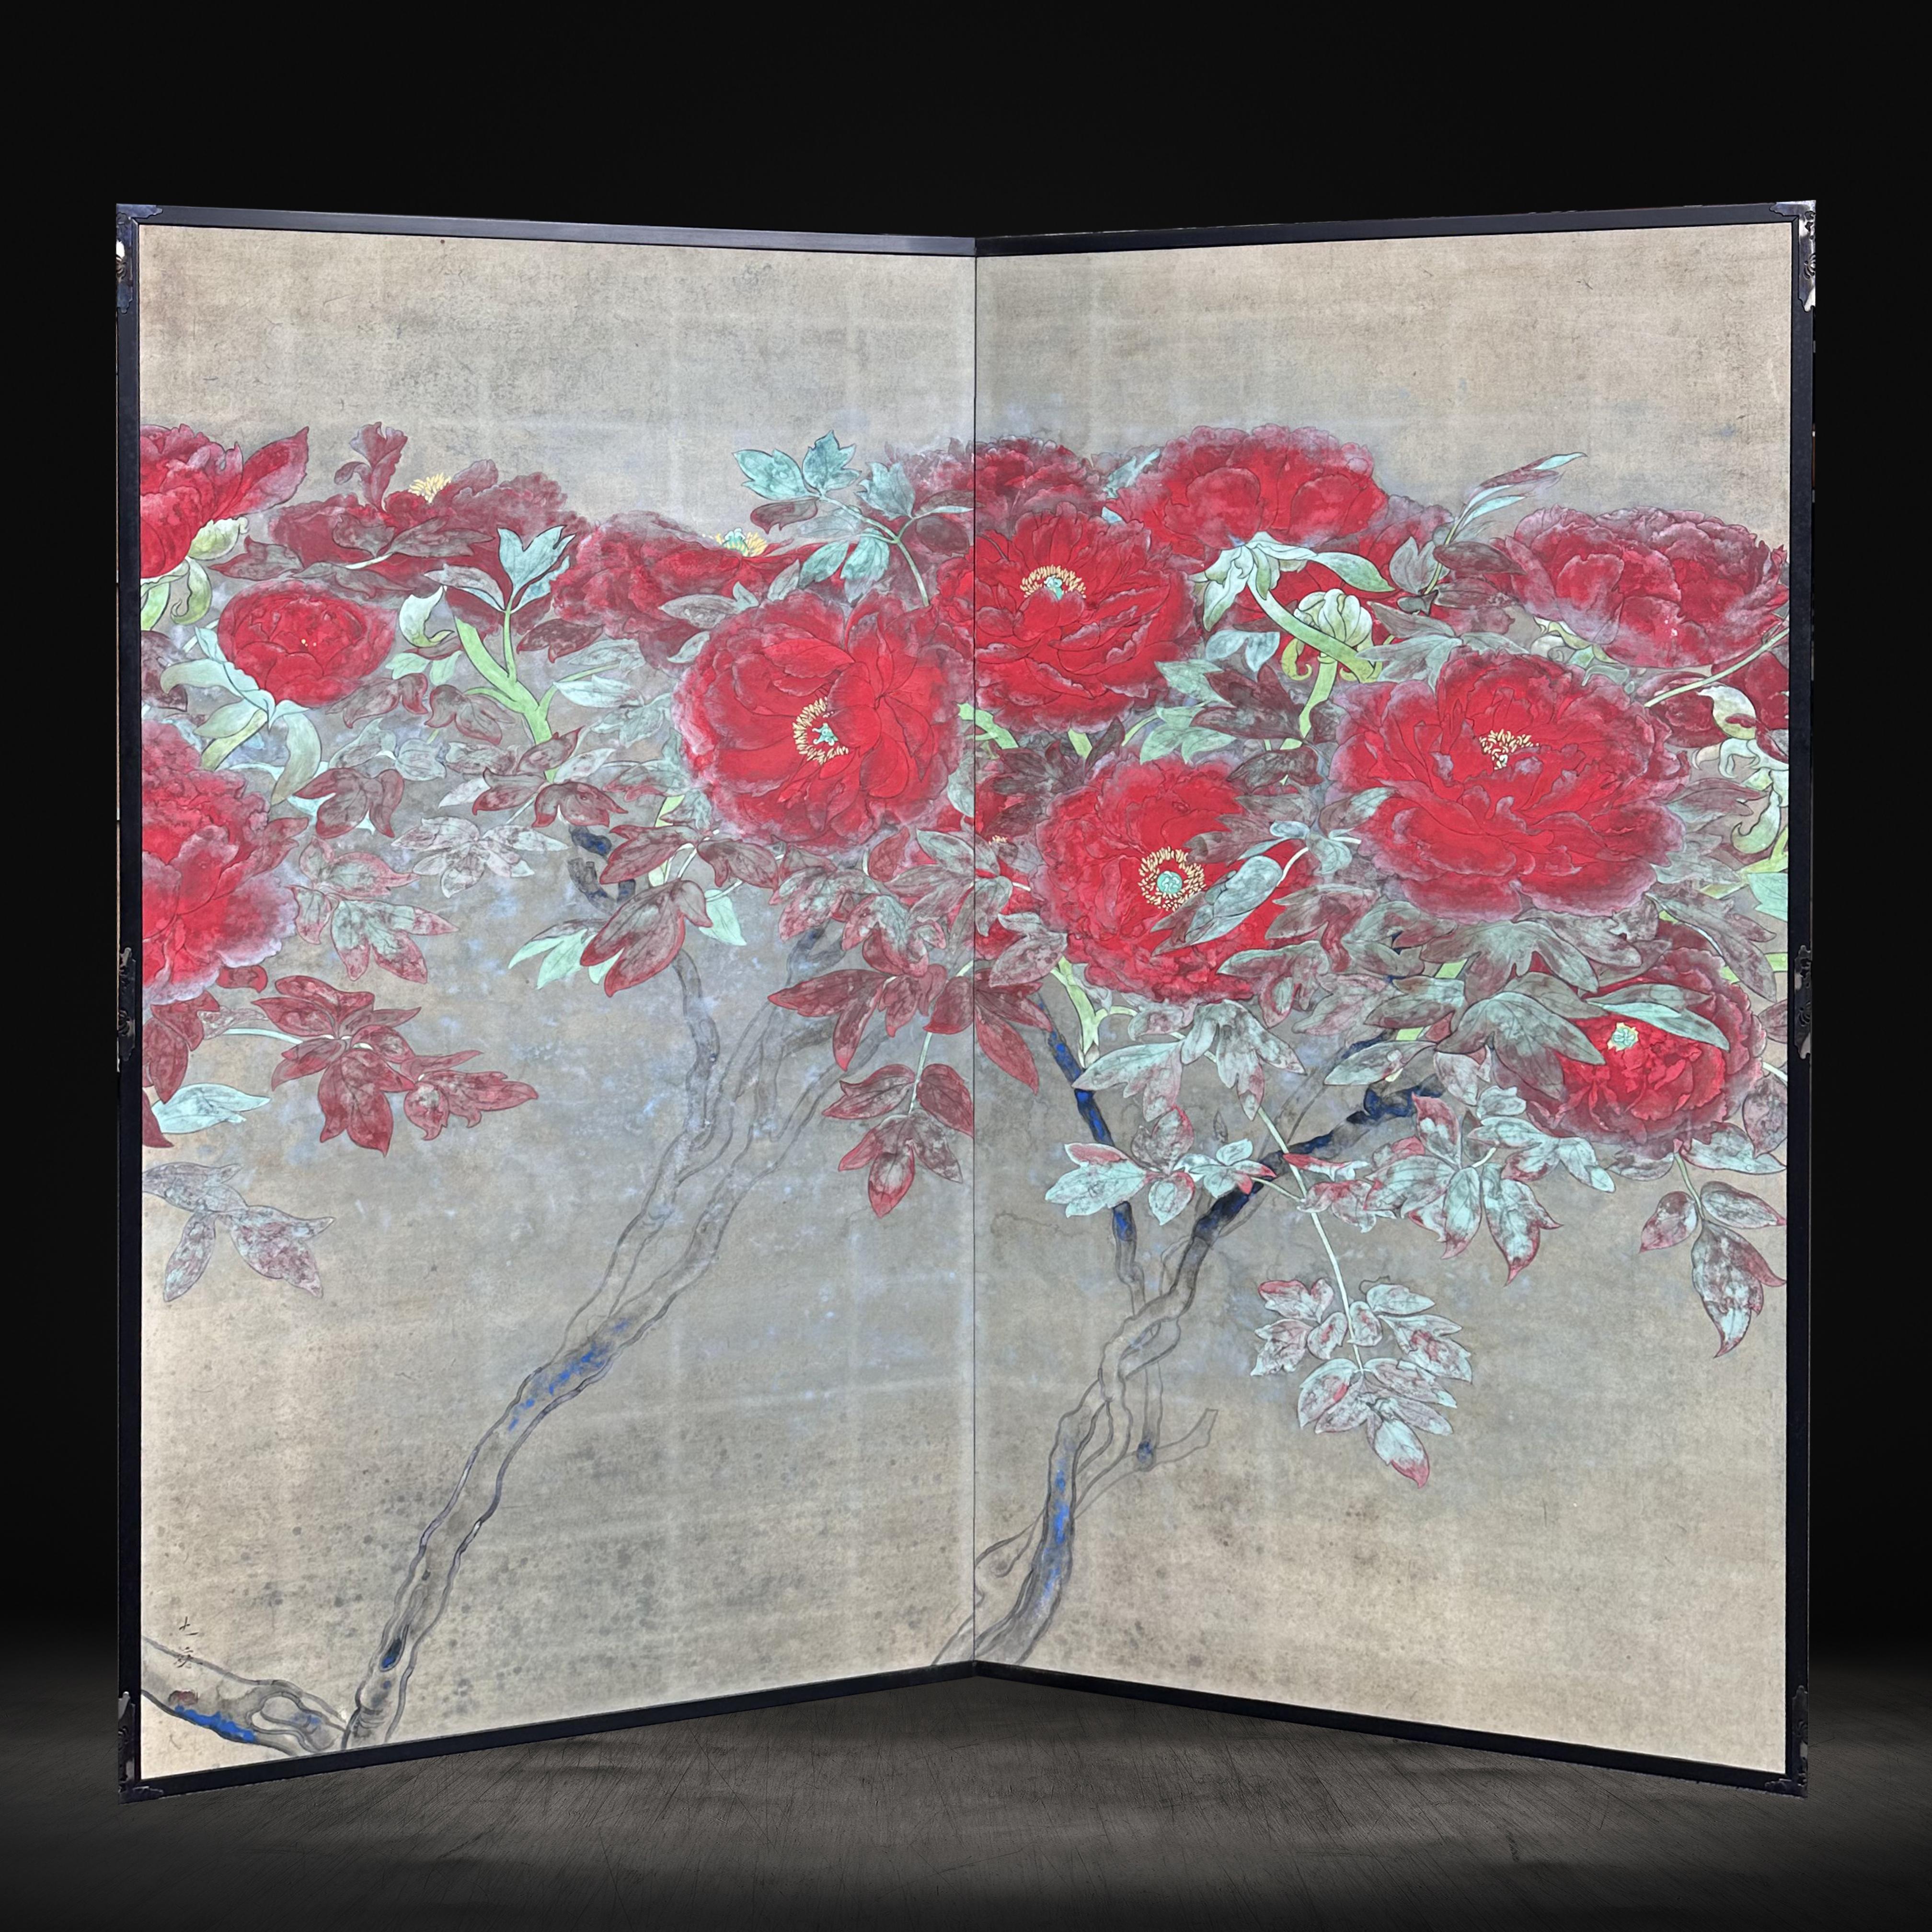 Majestic 'Botan' (Tree Peony) Screen from the Taisho Period

Period: 1930-1940 (Taisho)
Size: 186 x 176 cm (73.2 x 69.3 inches)
SKU: PL43

Immerse yourself in the regal beauty of this screen, adorned with the revered 'Botan,' or tree peony. Known as